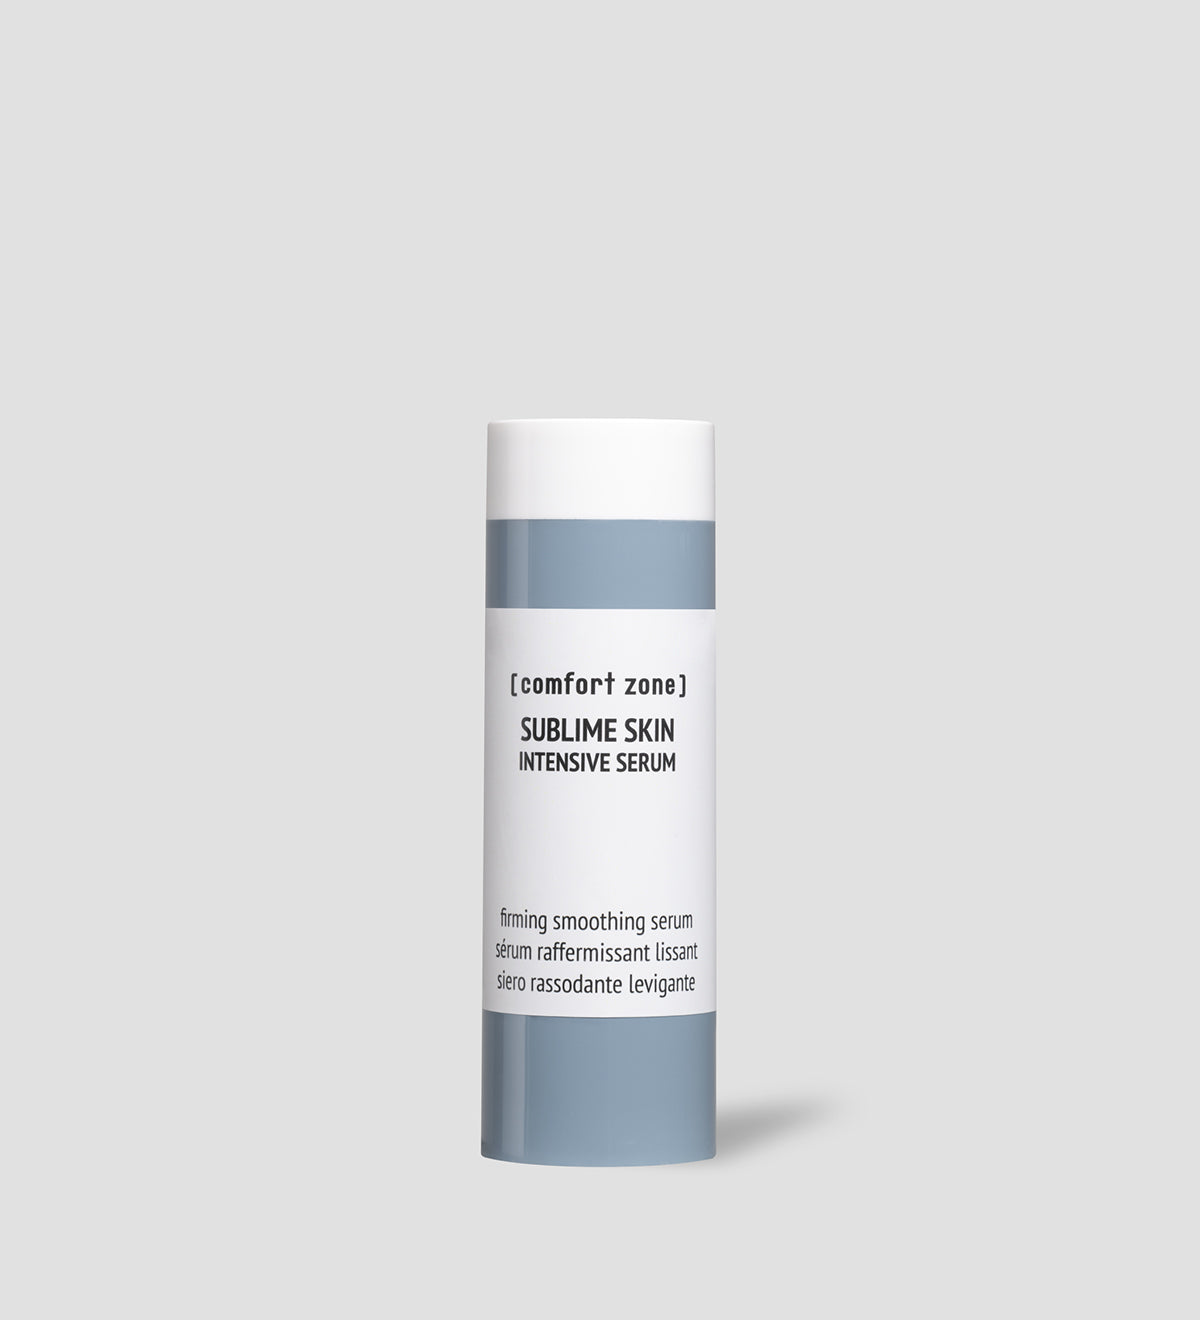 Comfort Zone: SUBLIME SKIN INTENSIVE SERUM REFILL Refill smoothing firming serum-